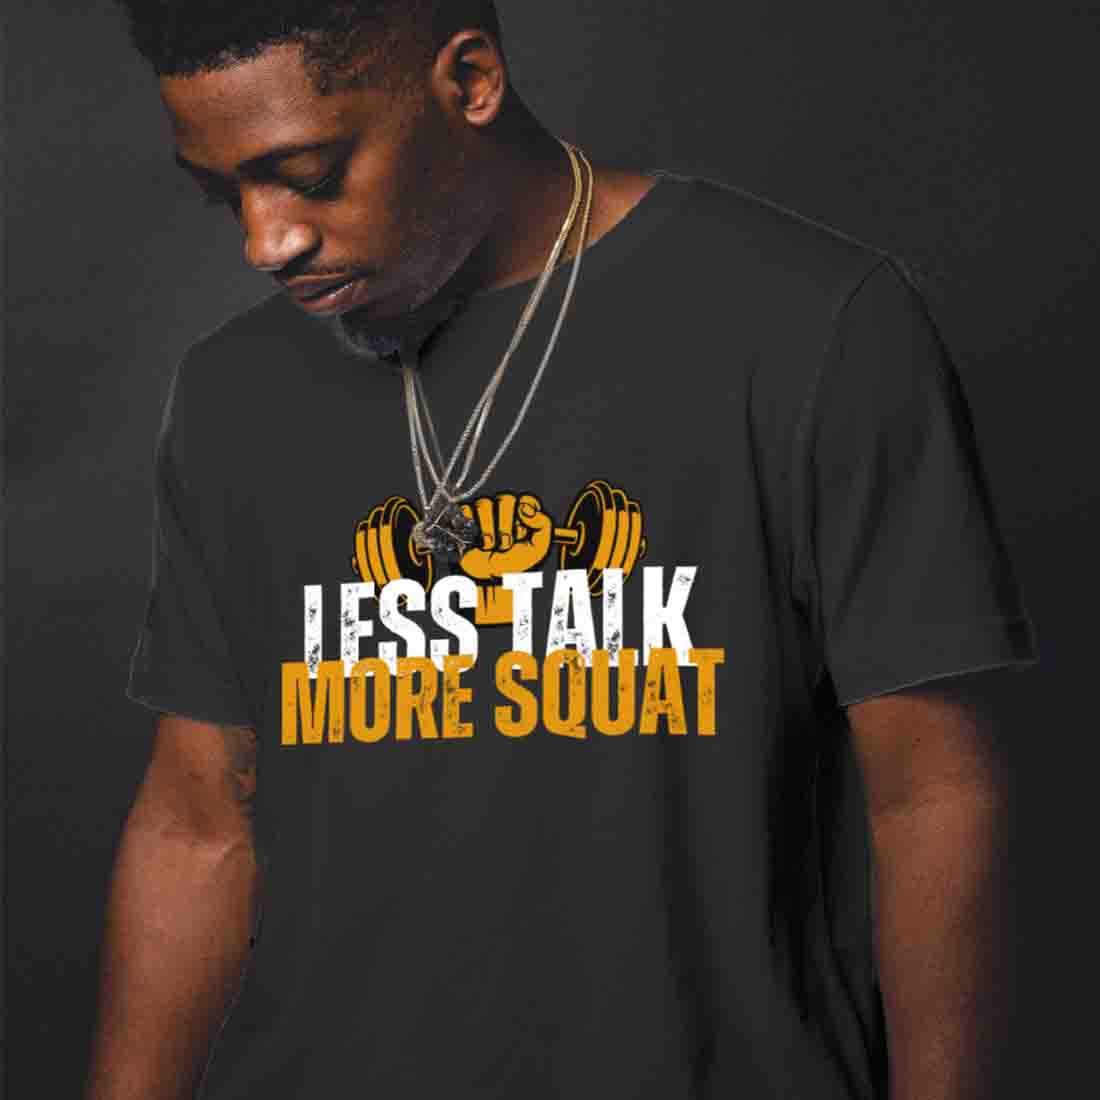 Less talk more squant tshirtdesign preview image.